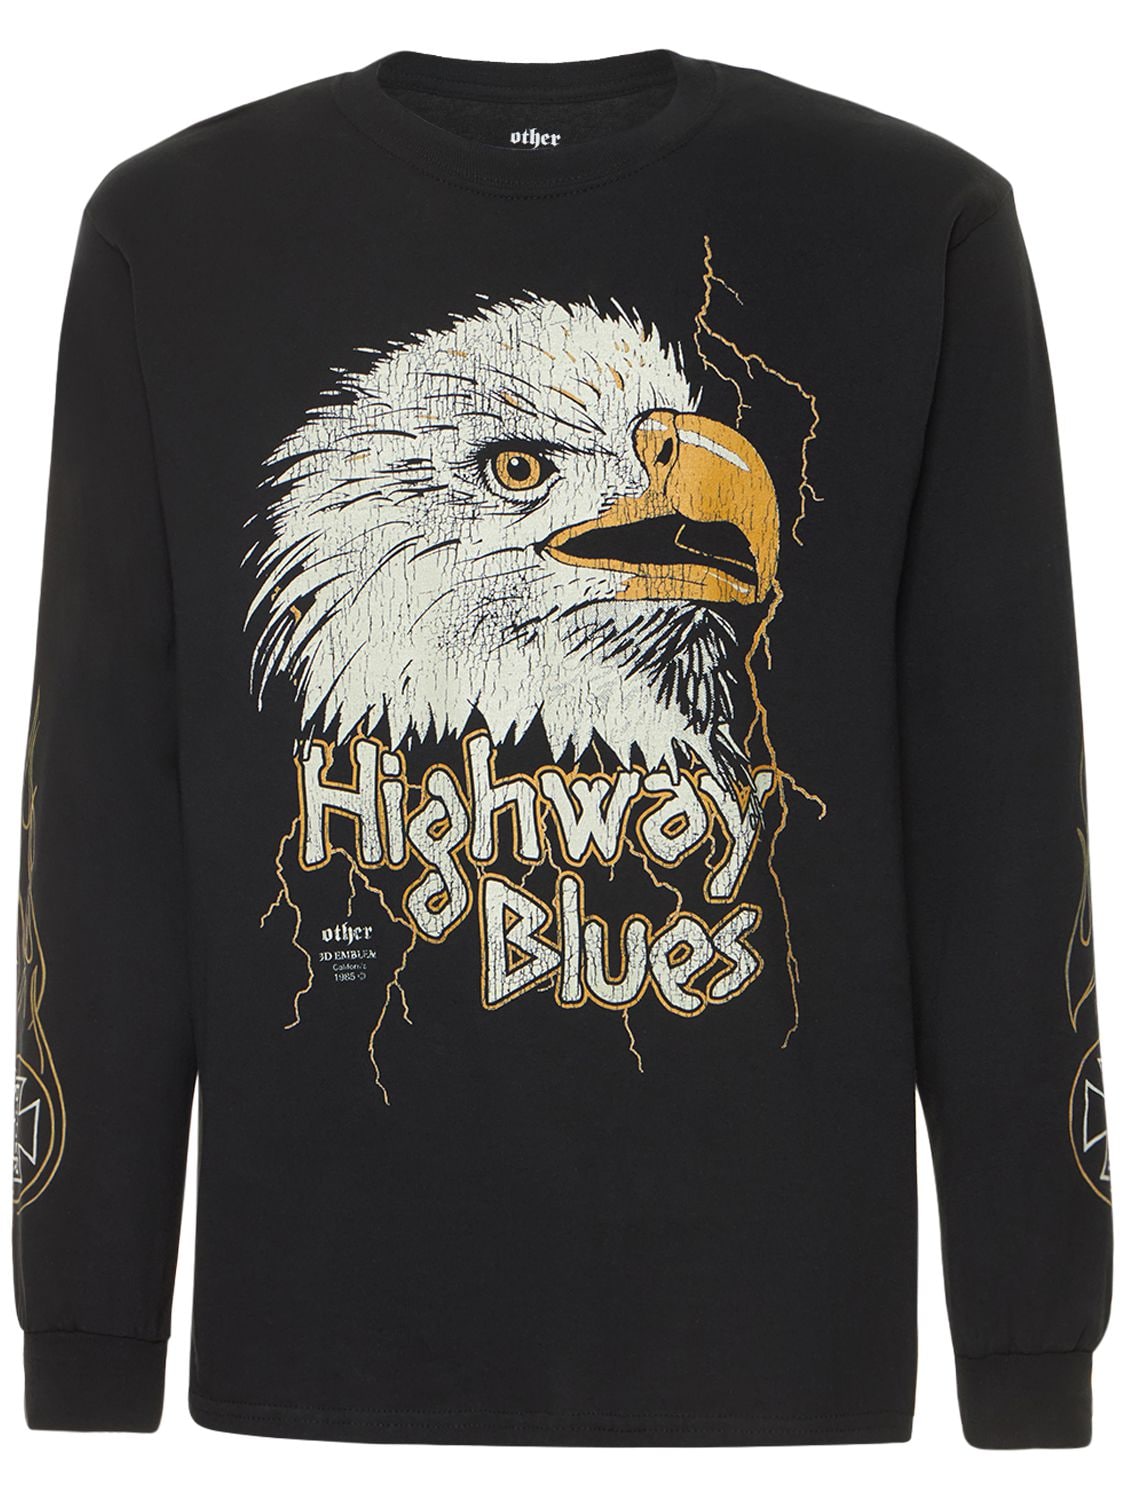 Other Eagle Vintage Cotton Long Sleeve T-shirt In Black